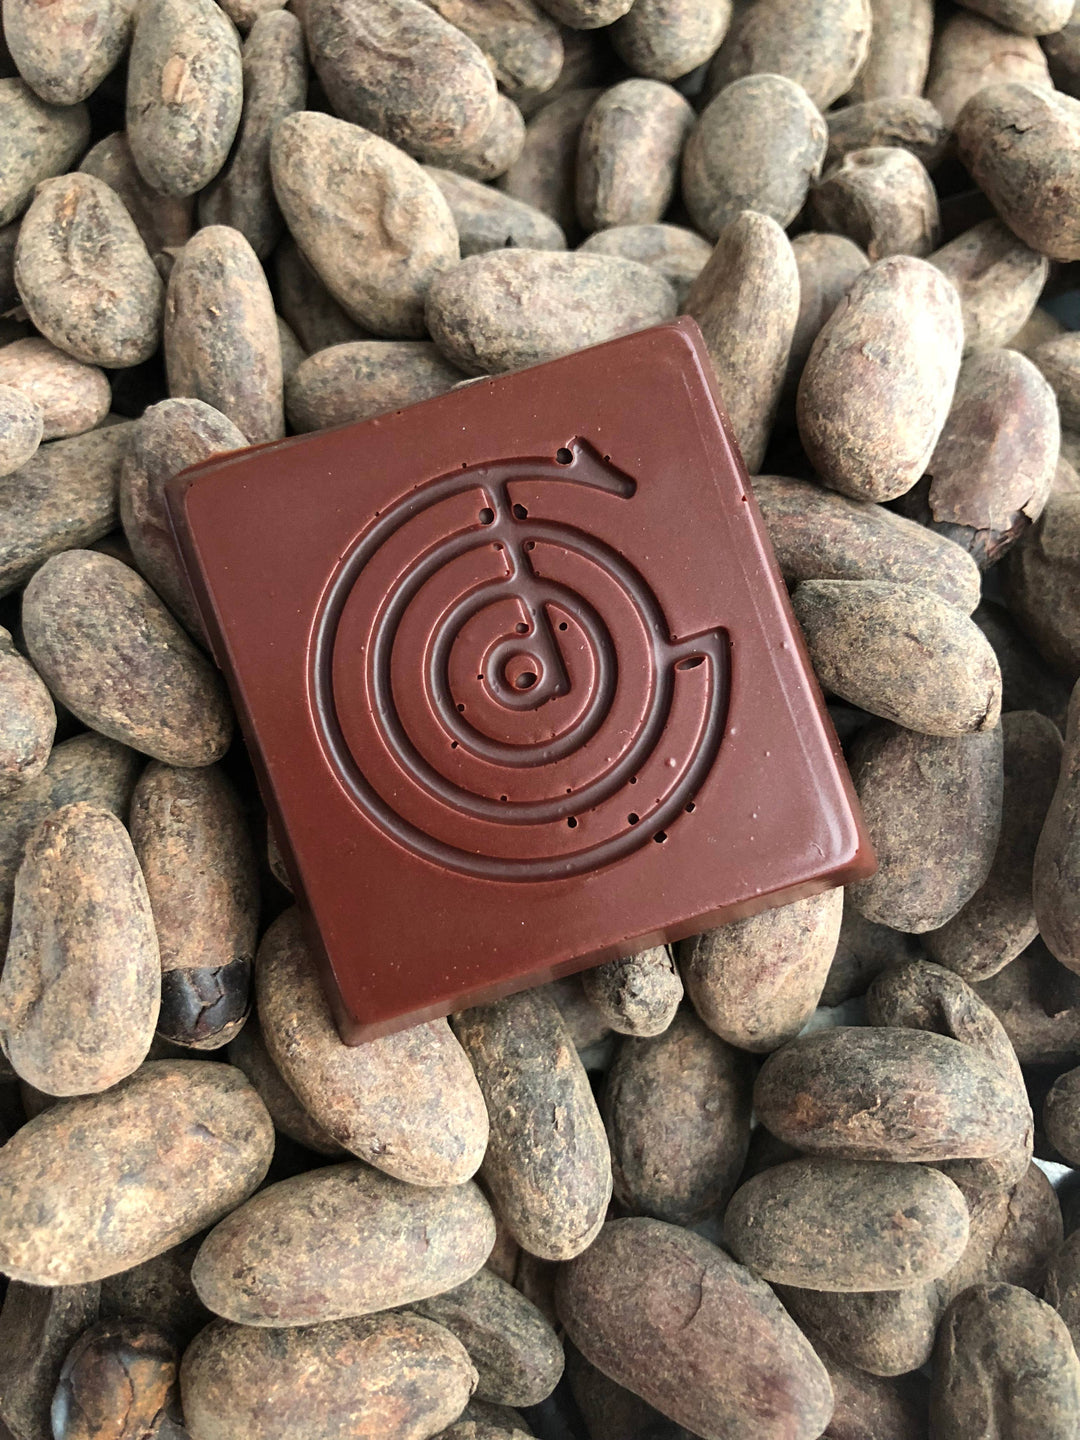 The Good Chocolate - Ginger Chocolate Square / 0.4 oz